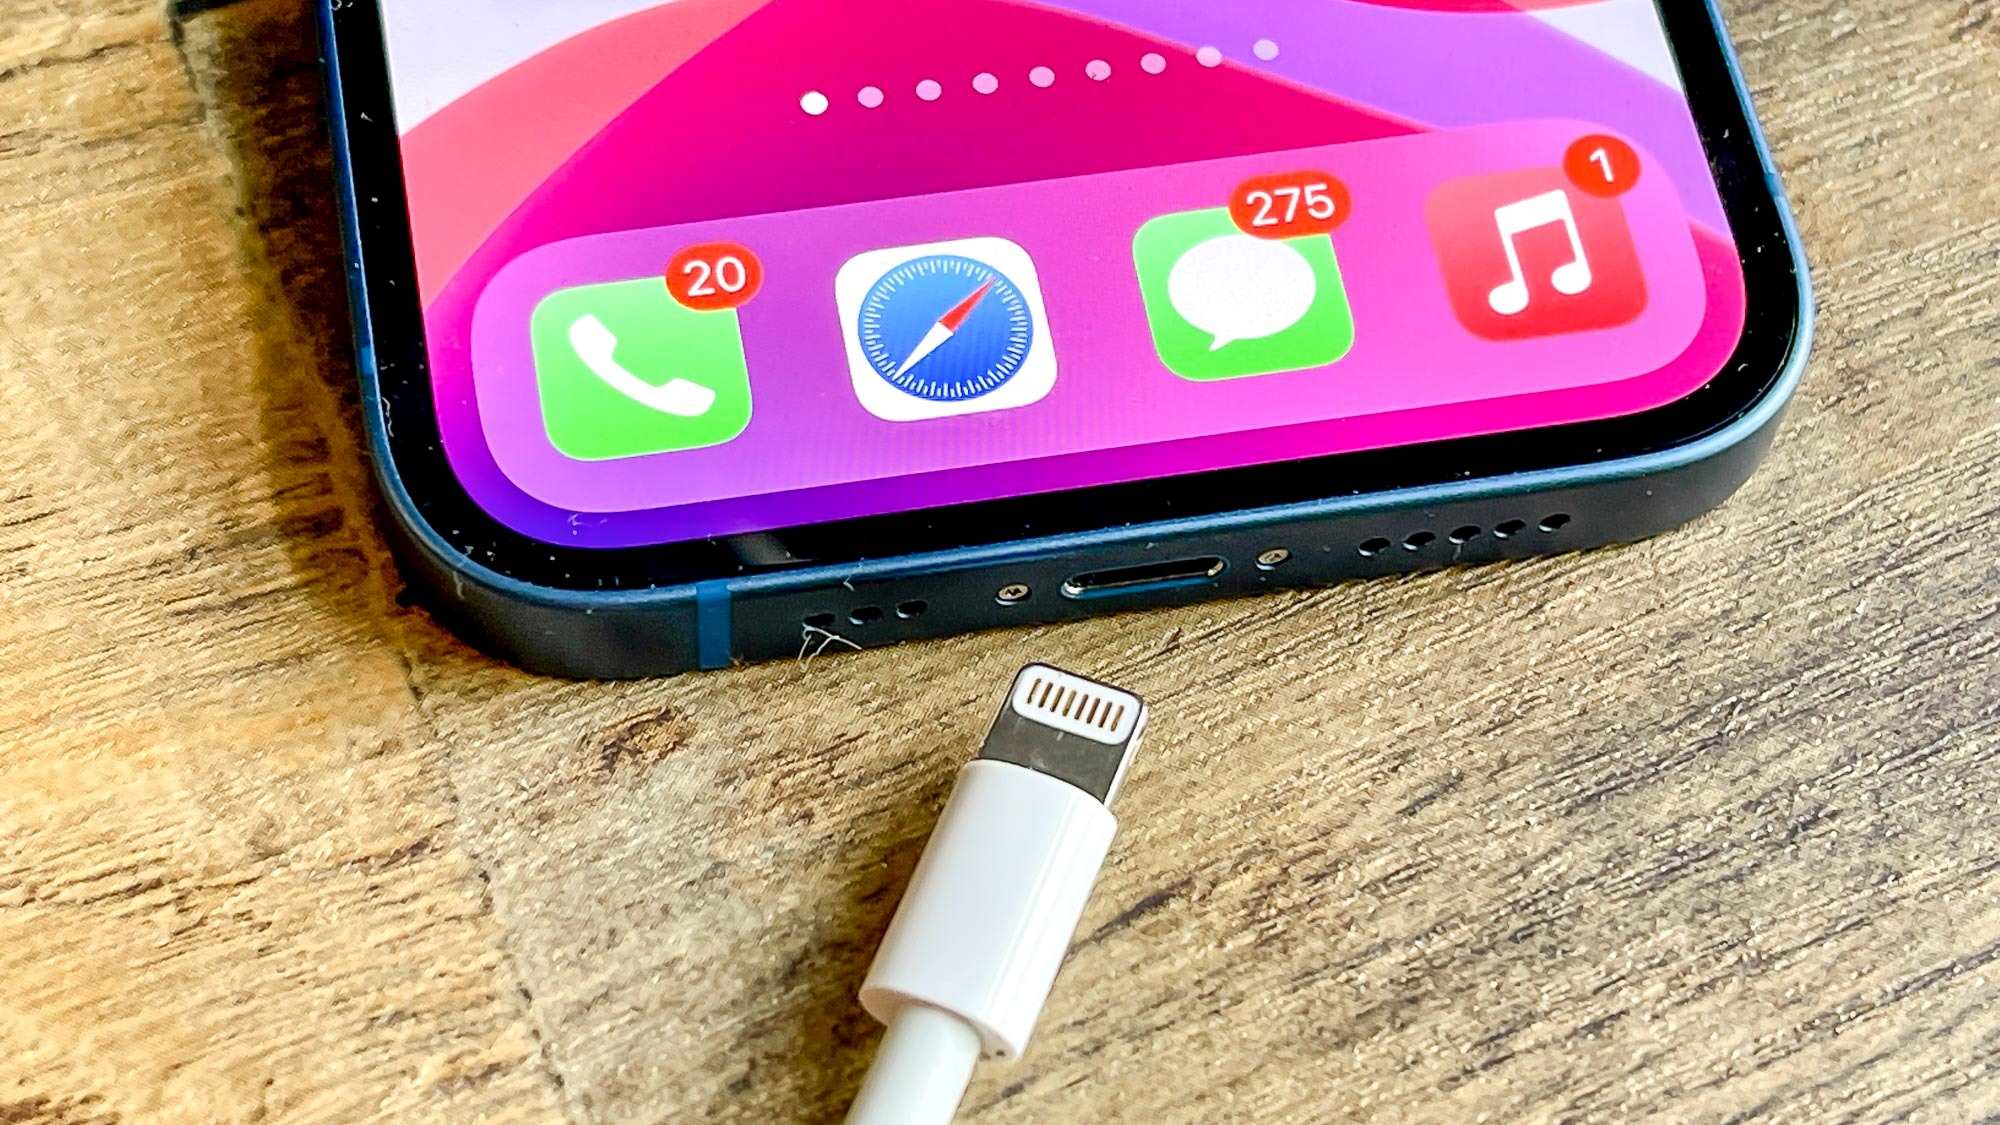 Why The IPhone Pro Desperately Needs Faster USB Transfer Speeds